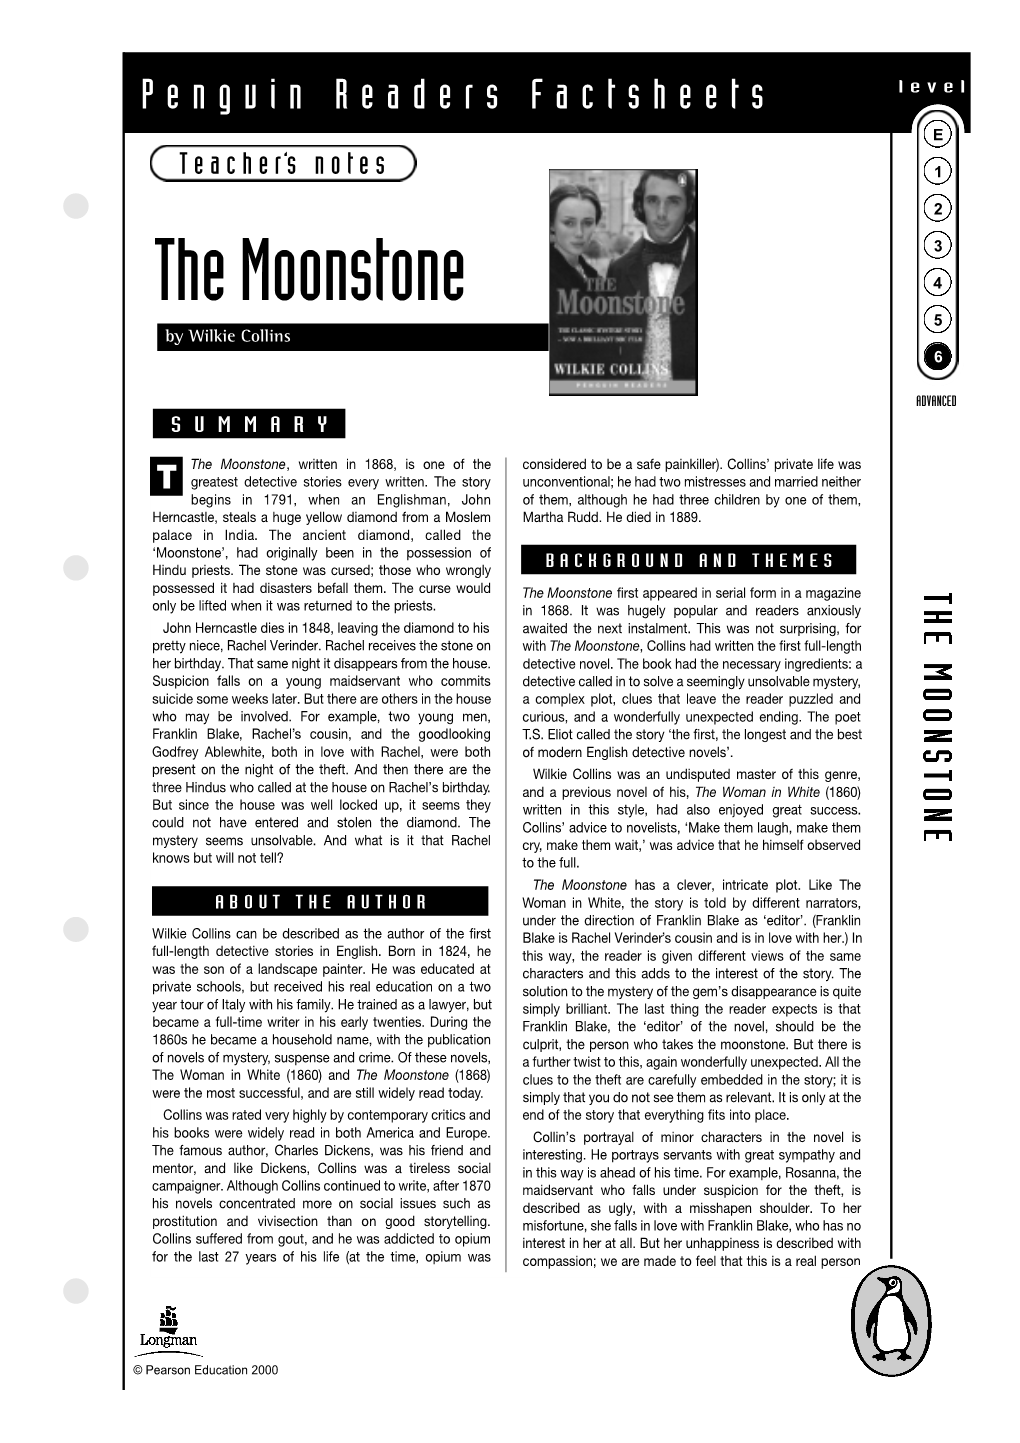 The Moonstone 4 5 by Wilkie Collins 6